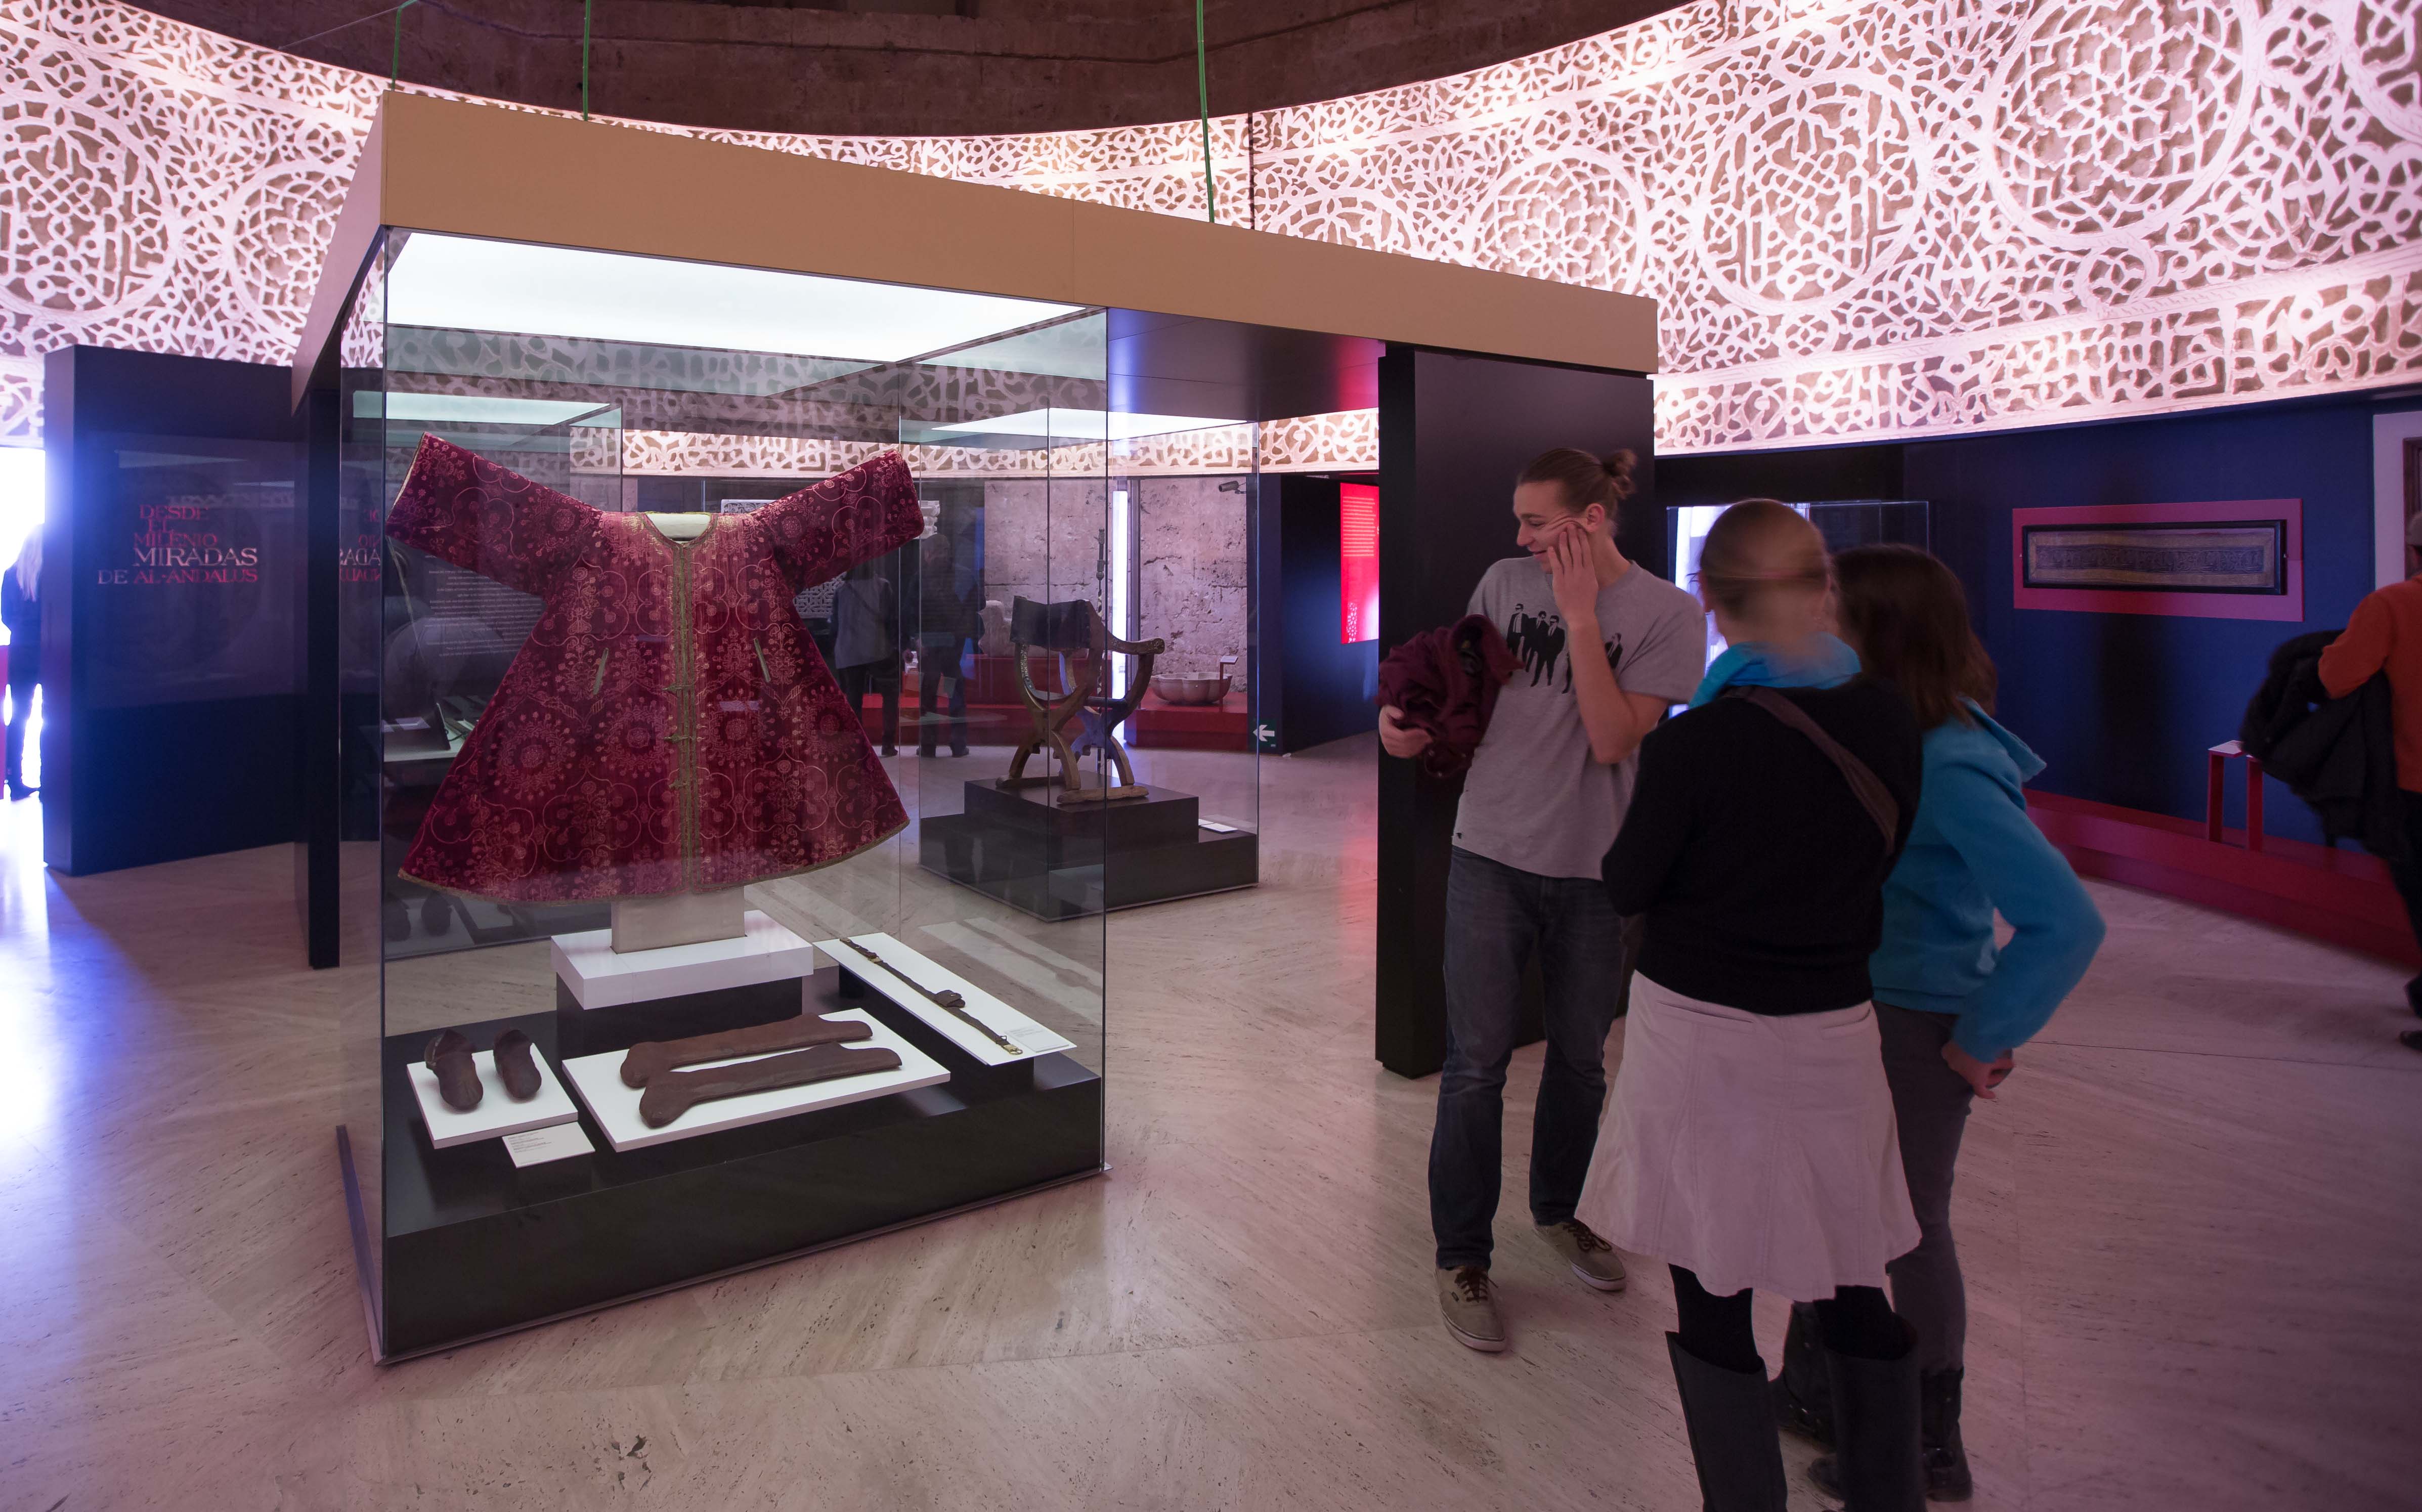 Over 100,000 people visited the exhibition “Art and Cultures of al-Andalus. The power of the Alhambra”